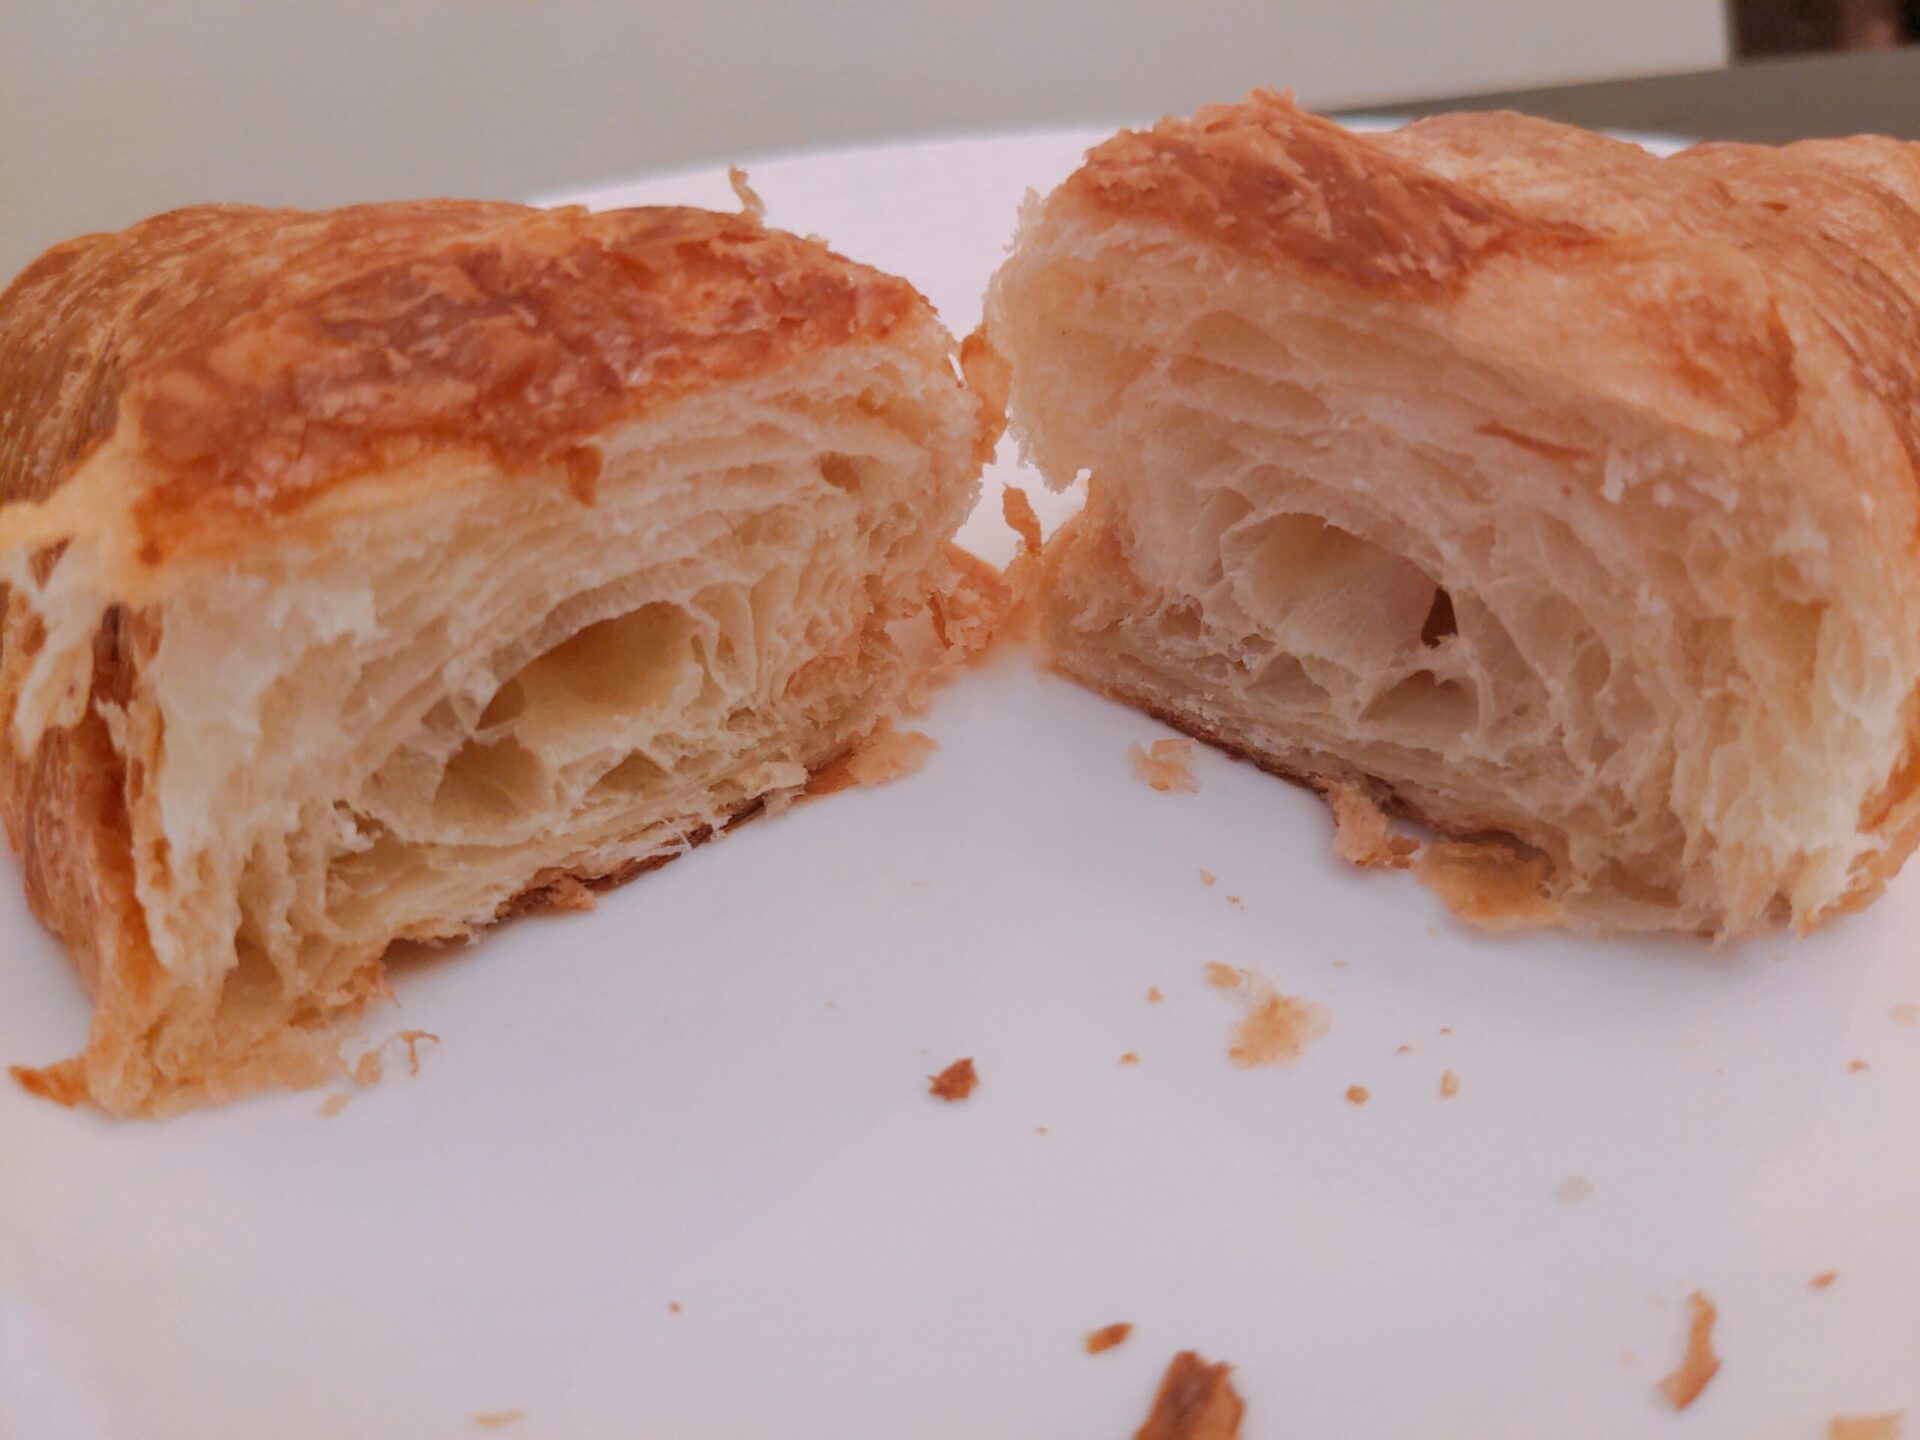 Costco Croissant Inside scaled